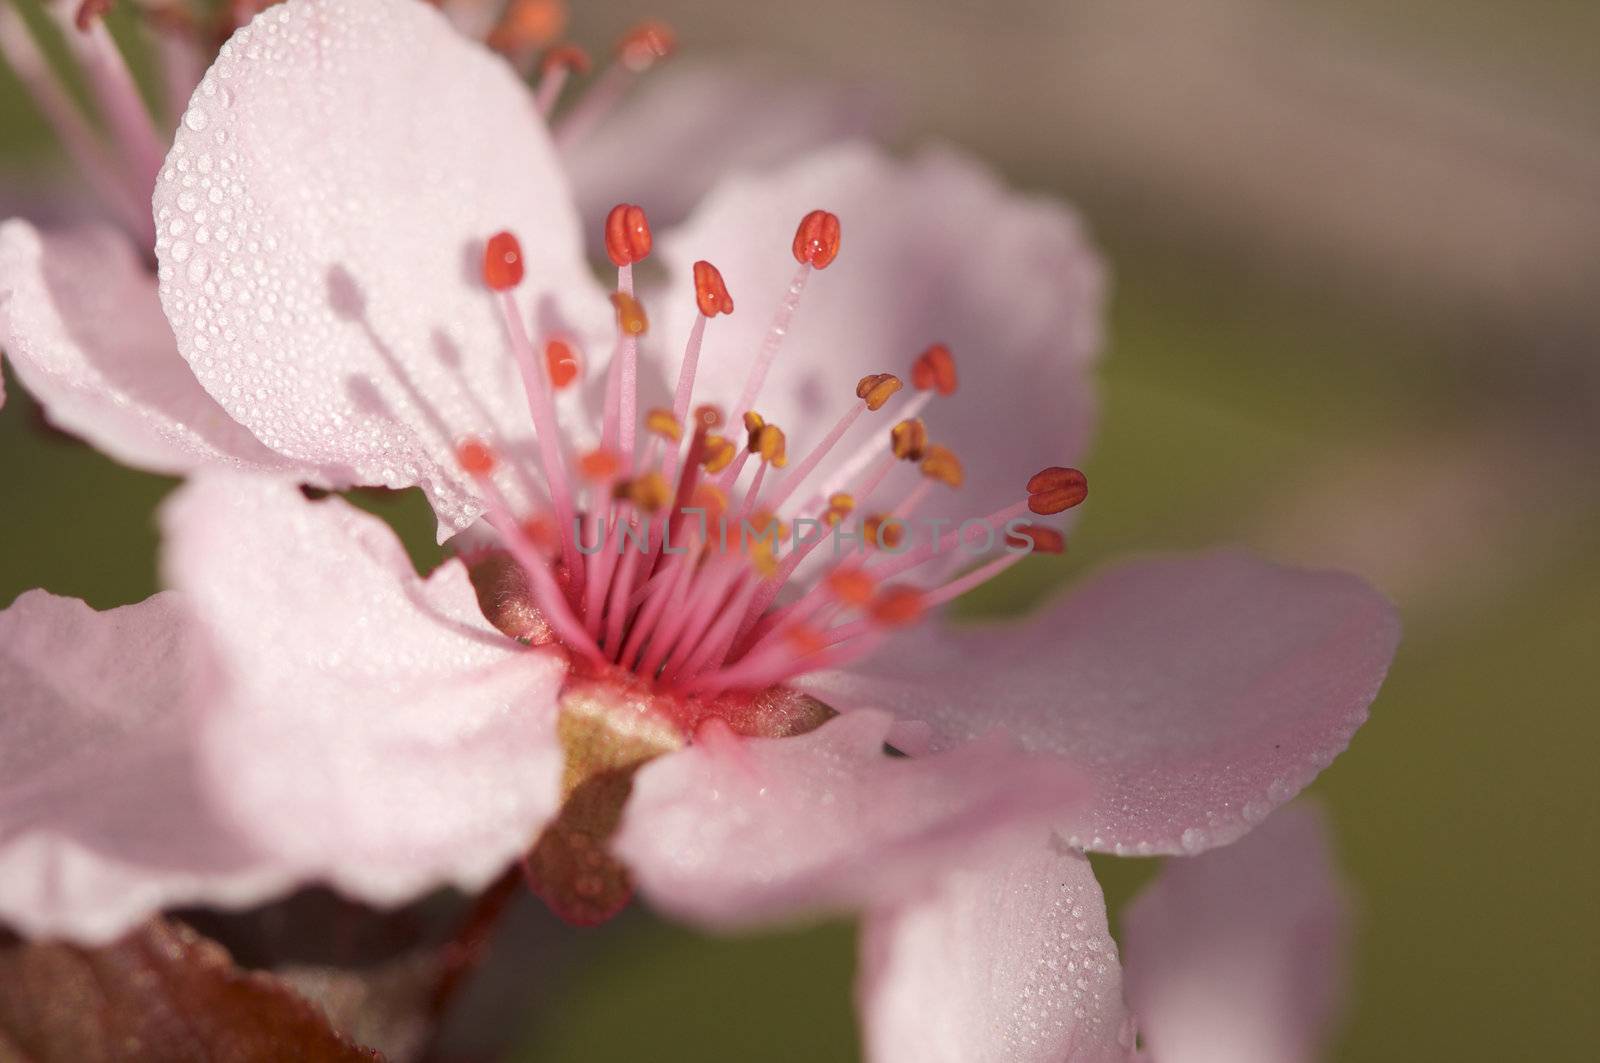 Early Spring Pink Tree Blossoms and Dew Drops with Narrow Depth of Field.